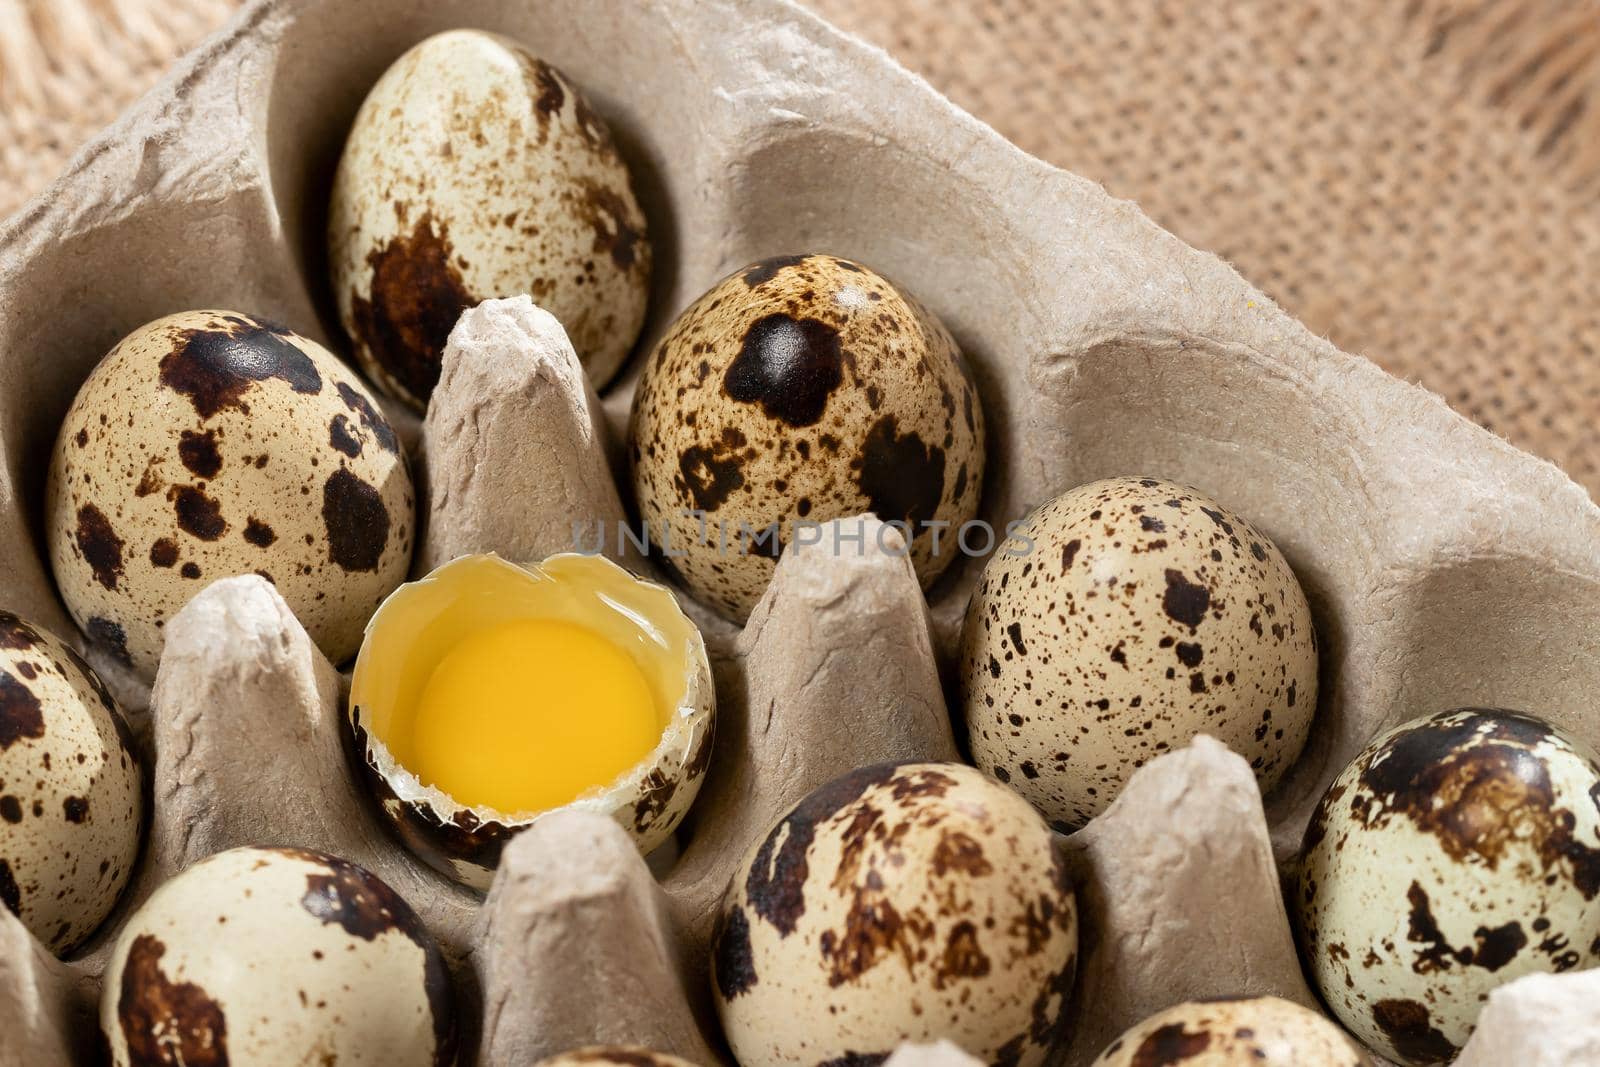 Quail eggs in cardboard packaging on a wooden table close-up by galsand